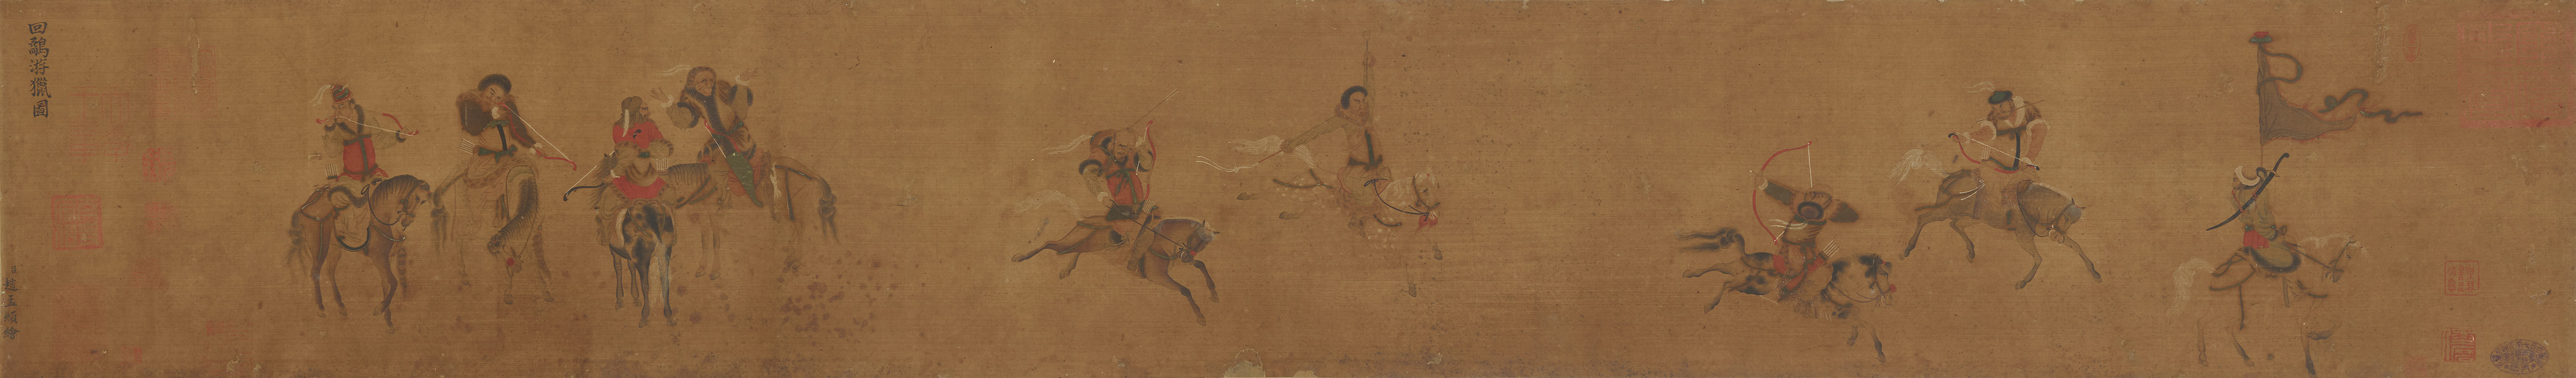 After Zhao Mengfu . Qing dynasty - Uyghurs on a hunting expedition (Huihu youlie tu). - image-2